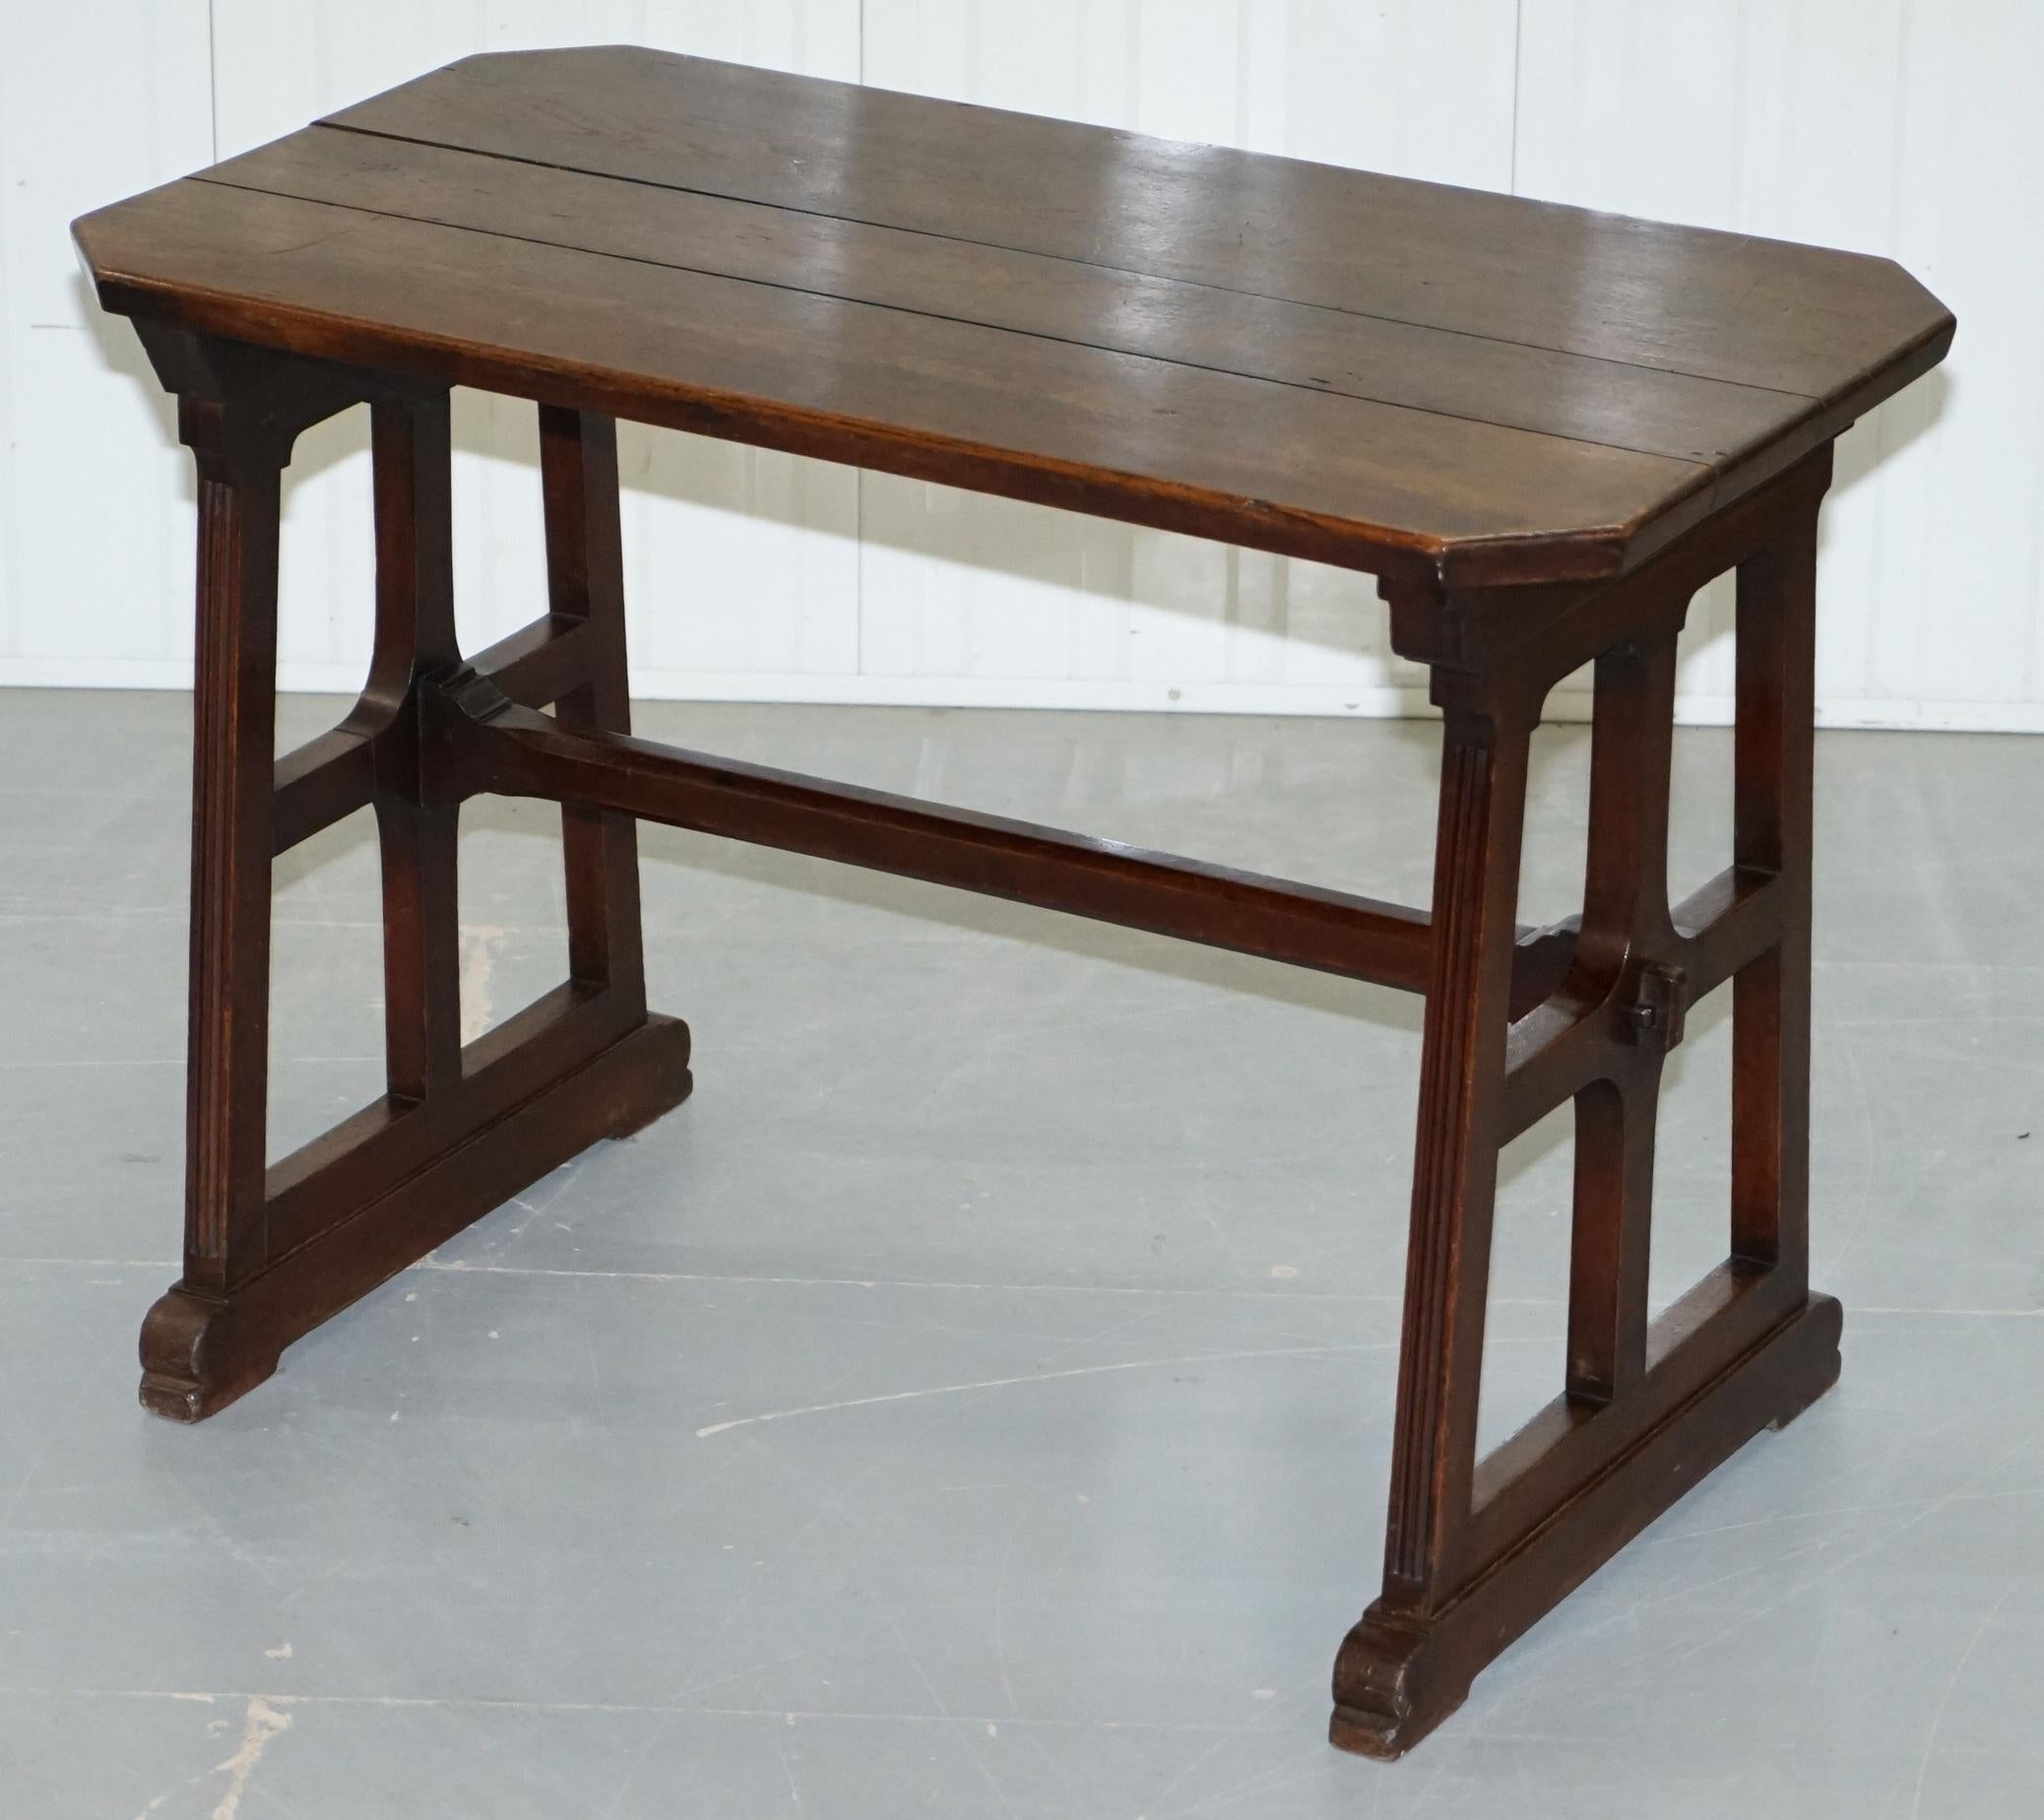 George III A.W.N Pugin Gothic Revival Vestry Writing Table Desk Made in England, circa 1780